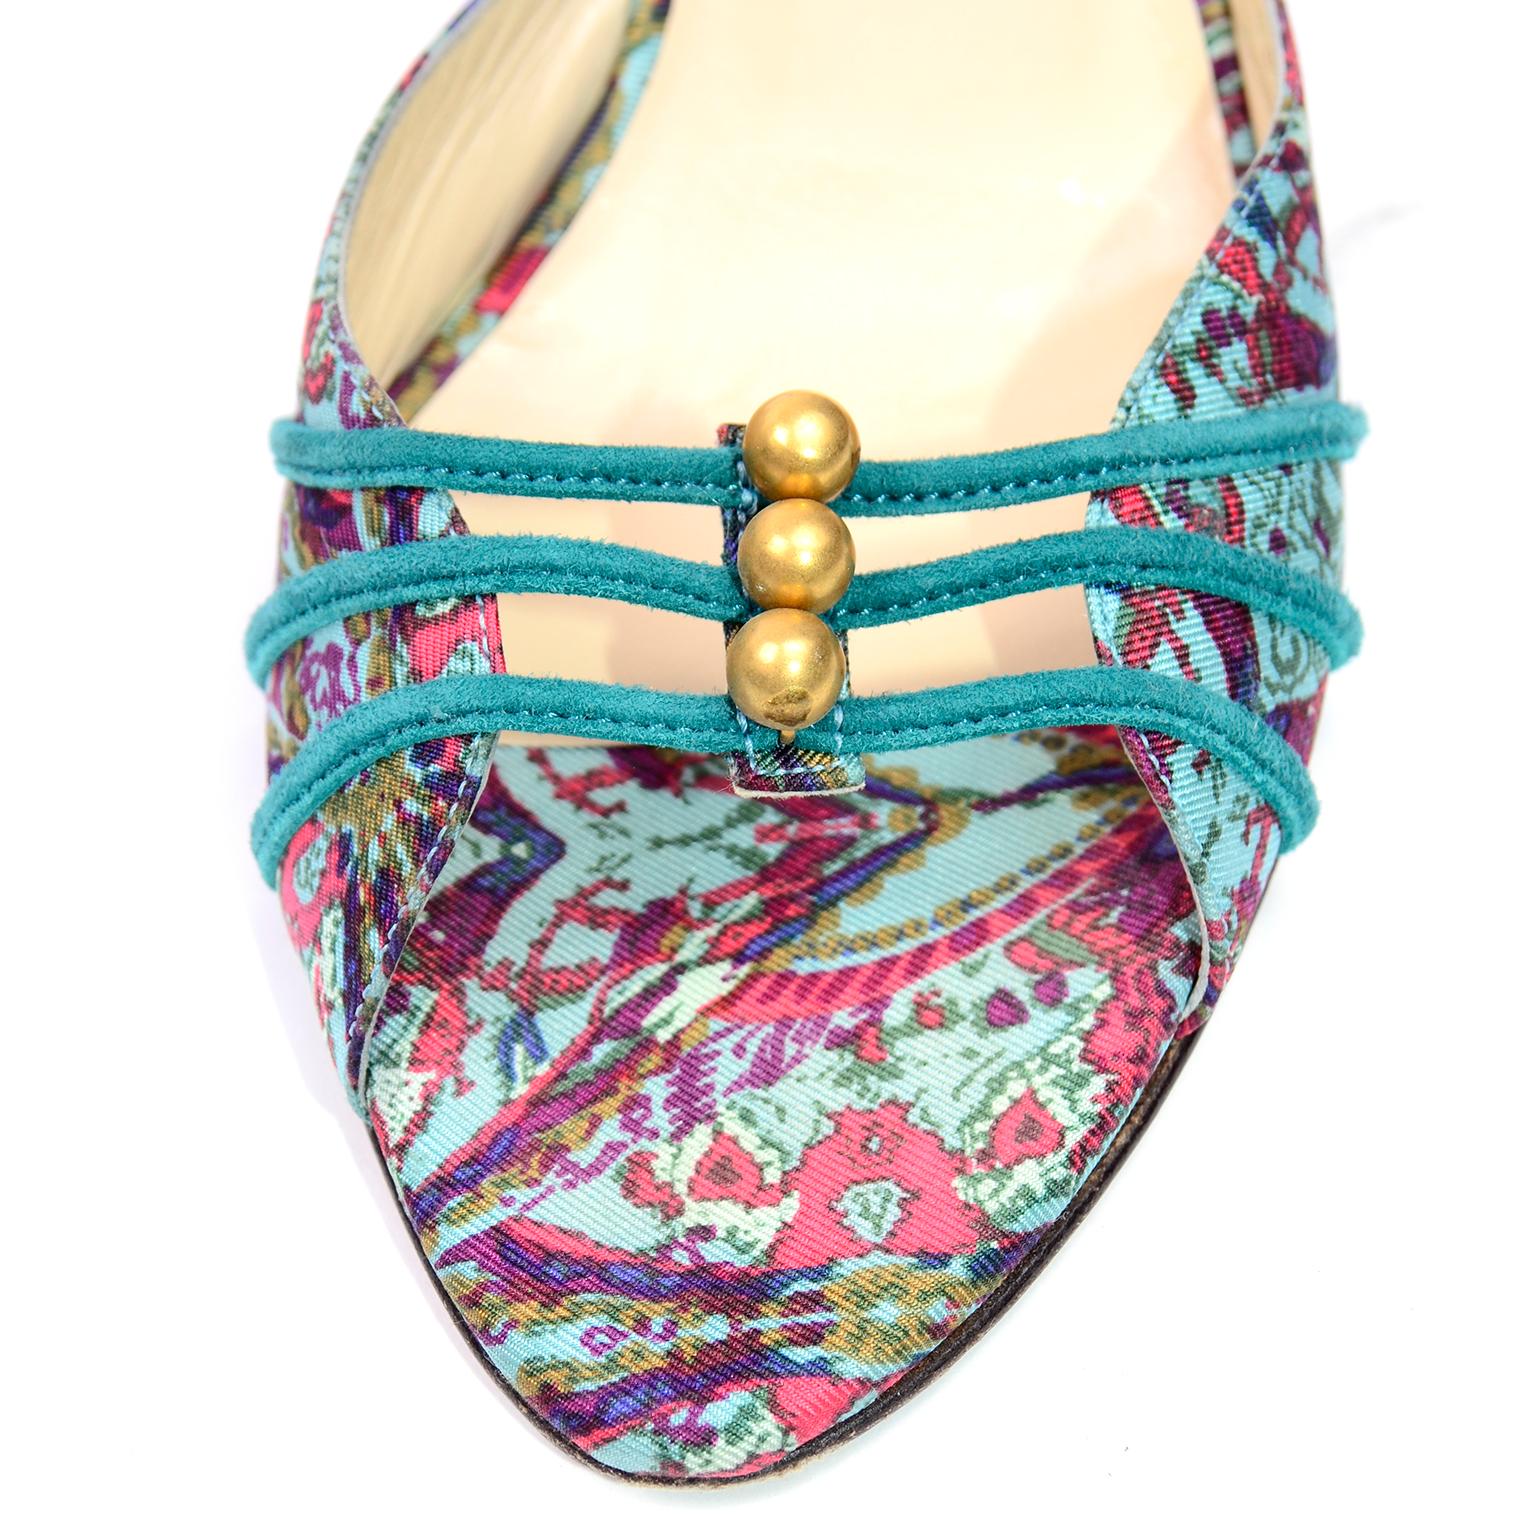 Women's Jimmy Choo London Colorful Mules Shoes in Turquoise Print W Heels & Gold Beads